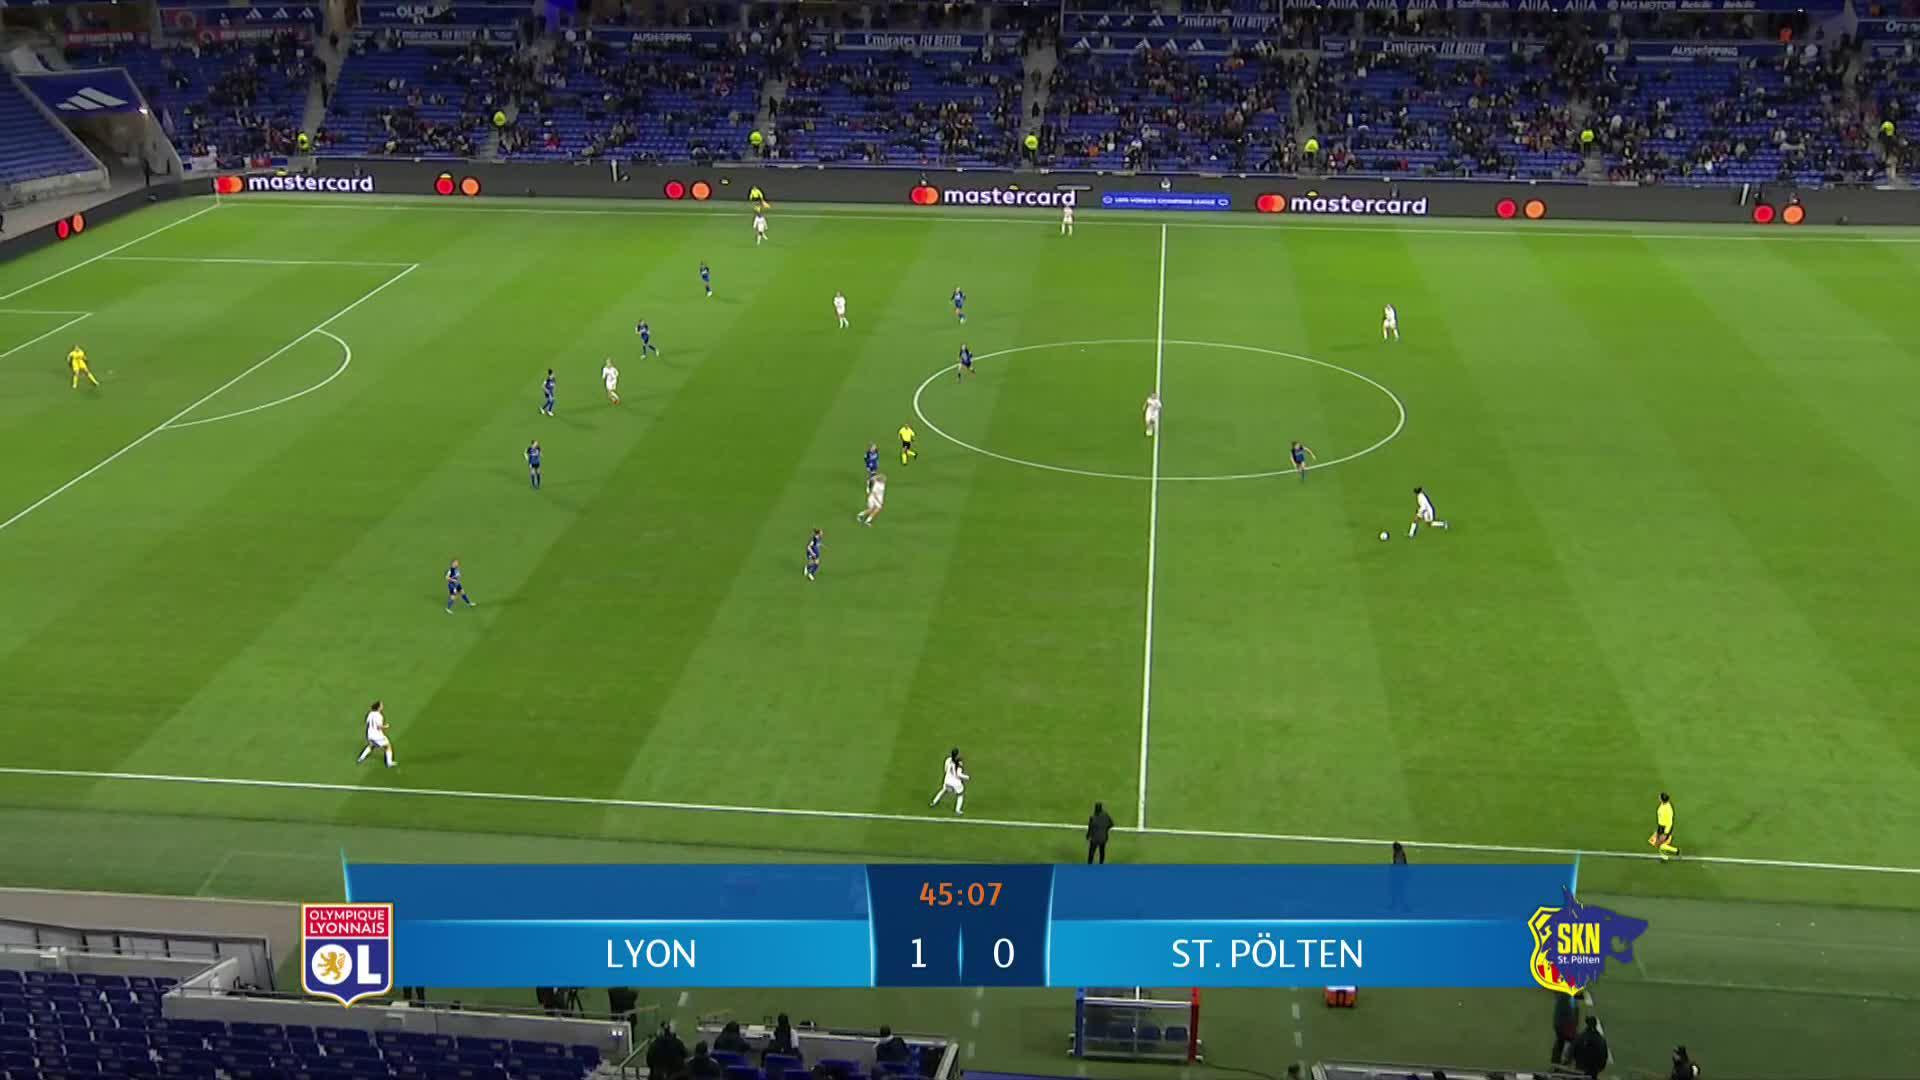 Lyon's onslaught of pressure force a St. Pölten own goal. The home side is cruising. 🏴󠁧󠁢󠁥󠁮󠁧󠁿 🎙️ 👉  🇫🇷 🎙️ 👉  🇩🇪 🎙️ 👉  #UWCLonDAZN